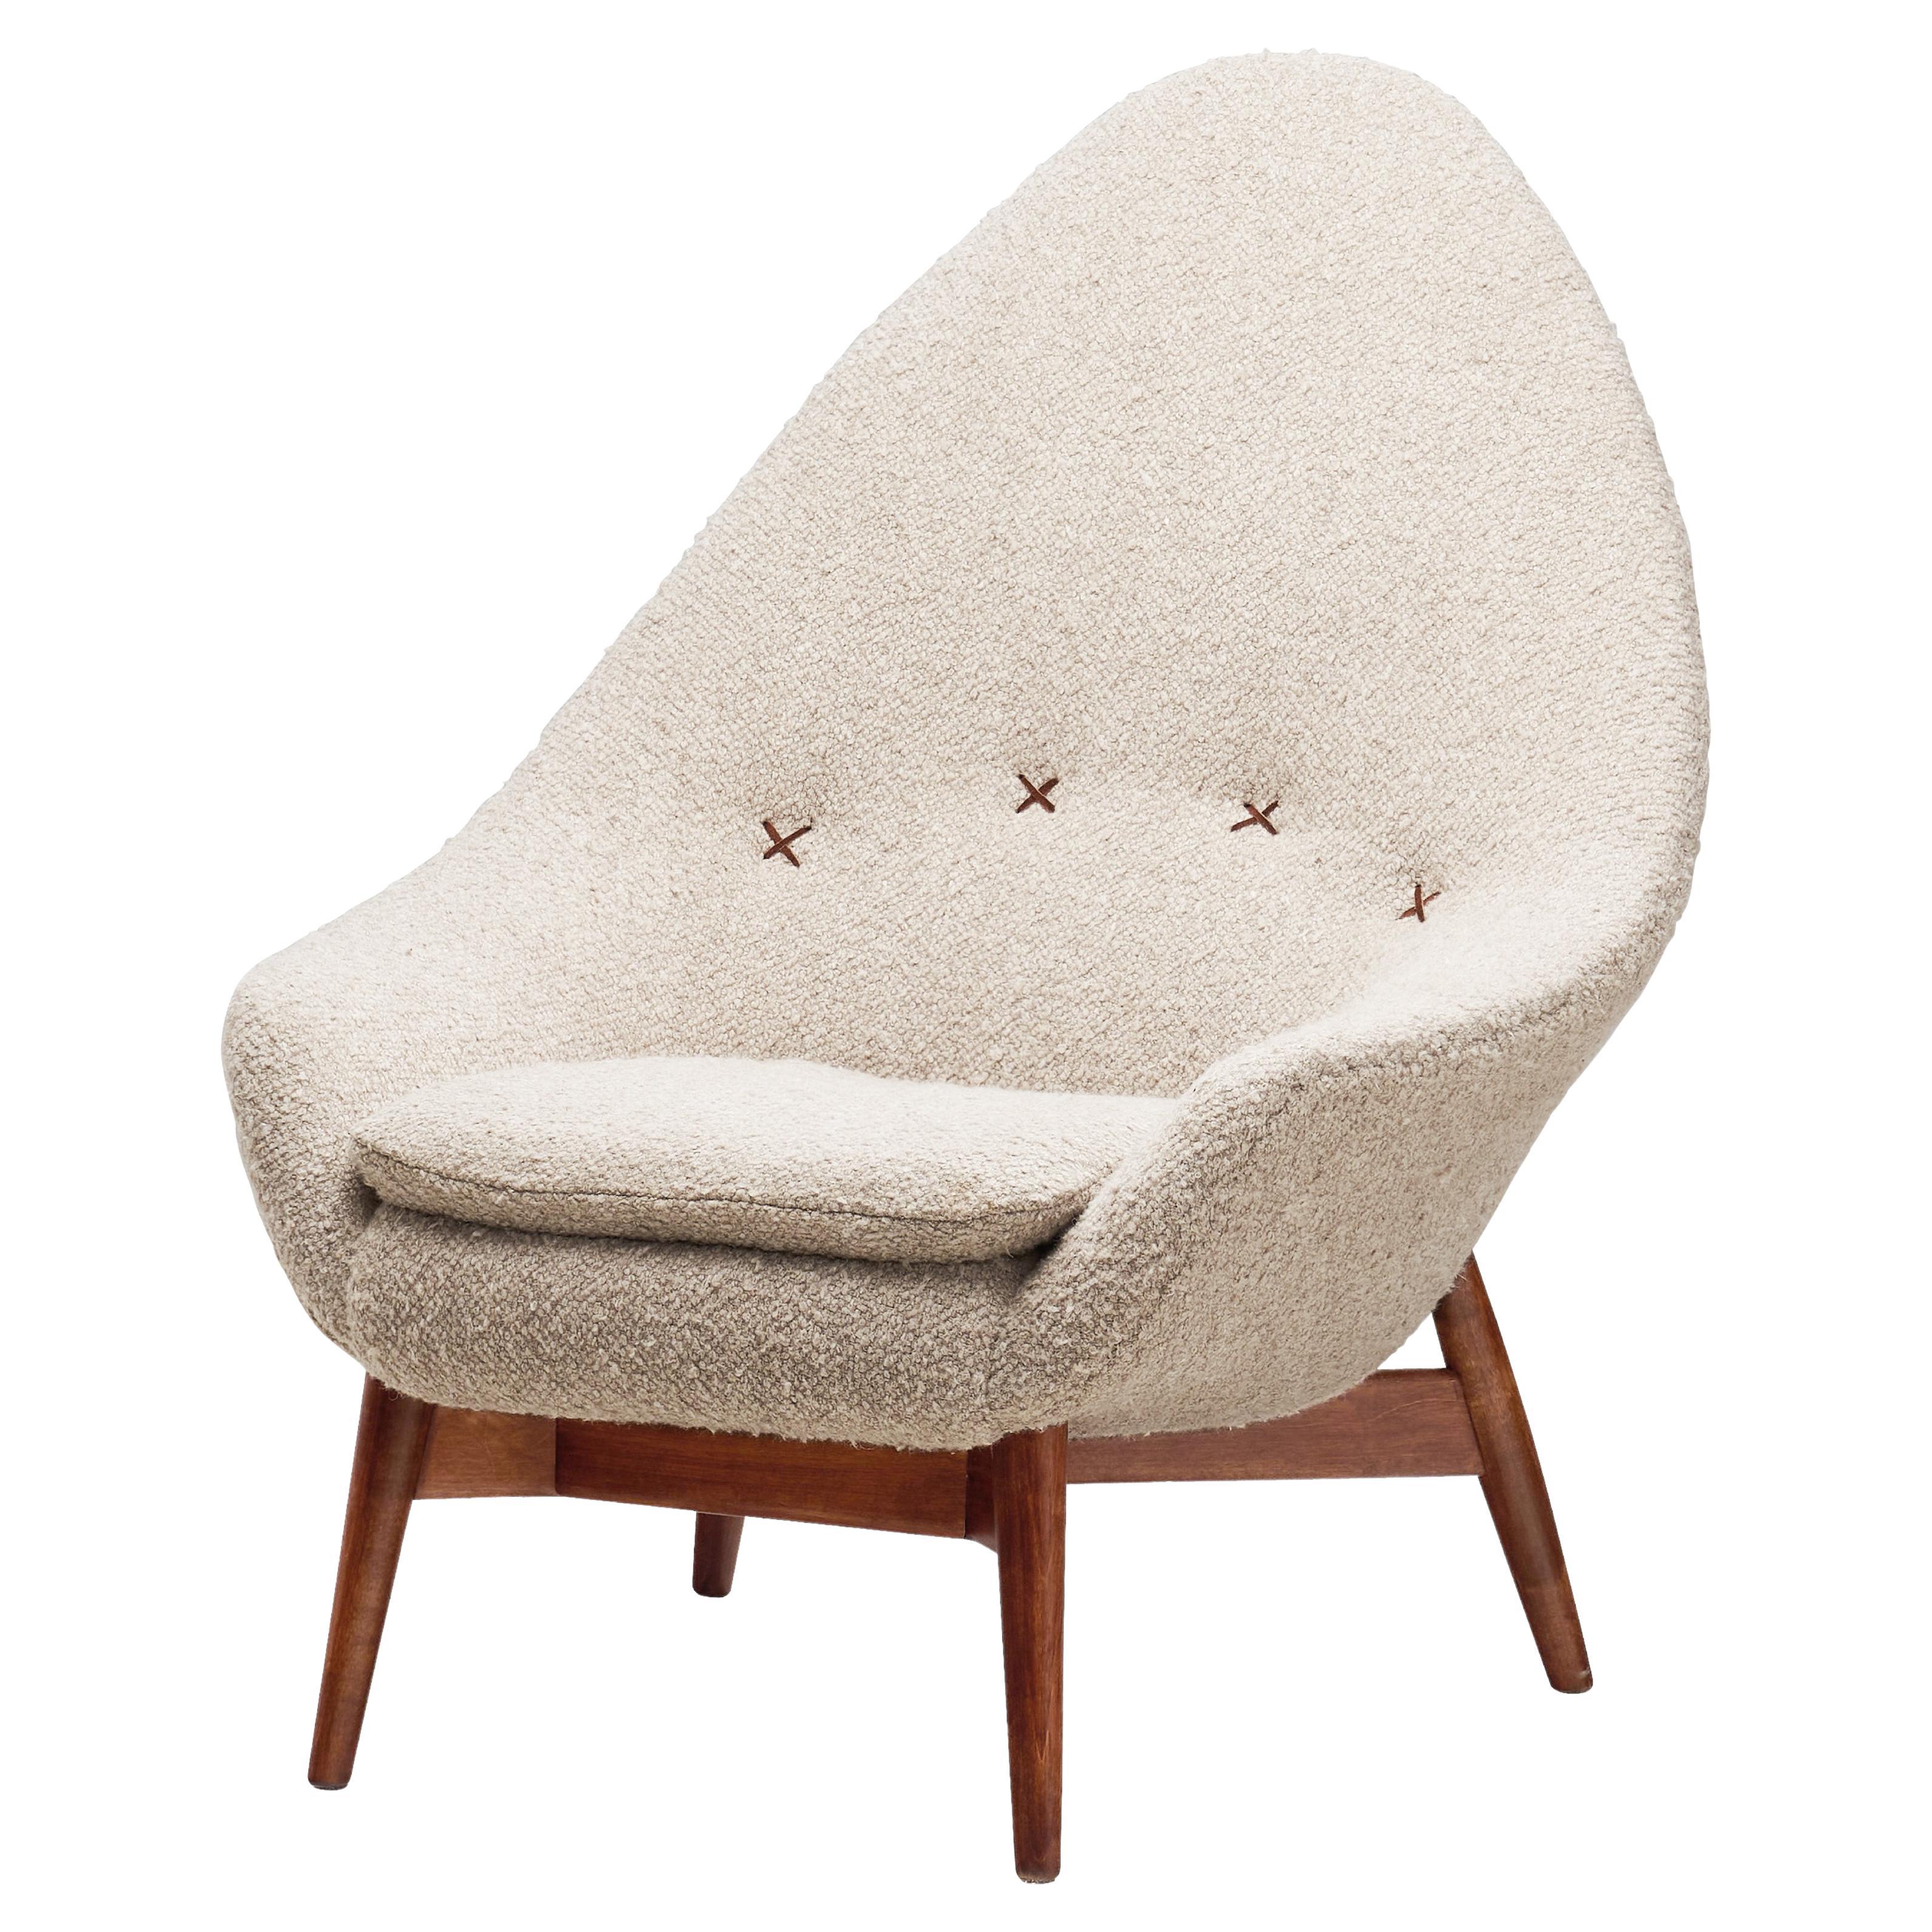 Olof Ottelin "Munk" Lounge Chair for Oy Stockmann Ab, Finland 1960s For Sale